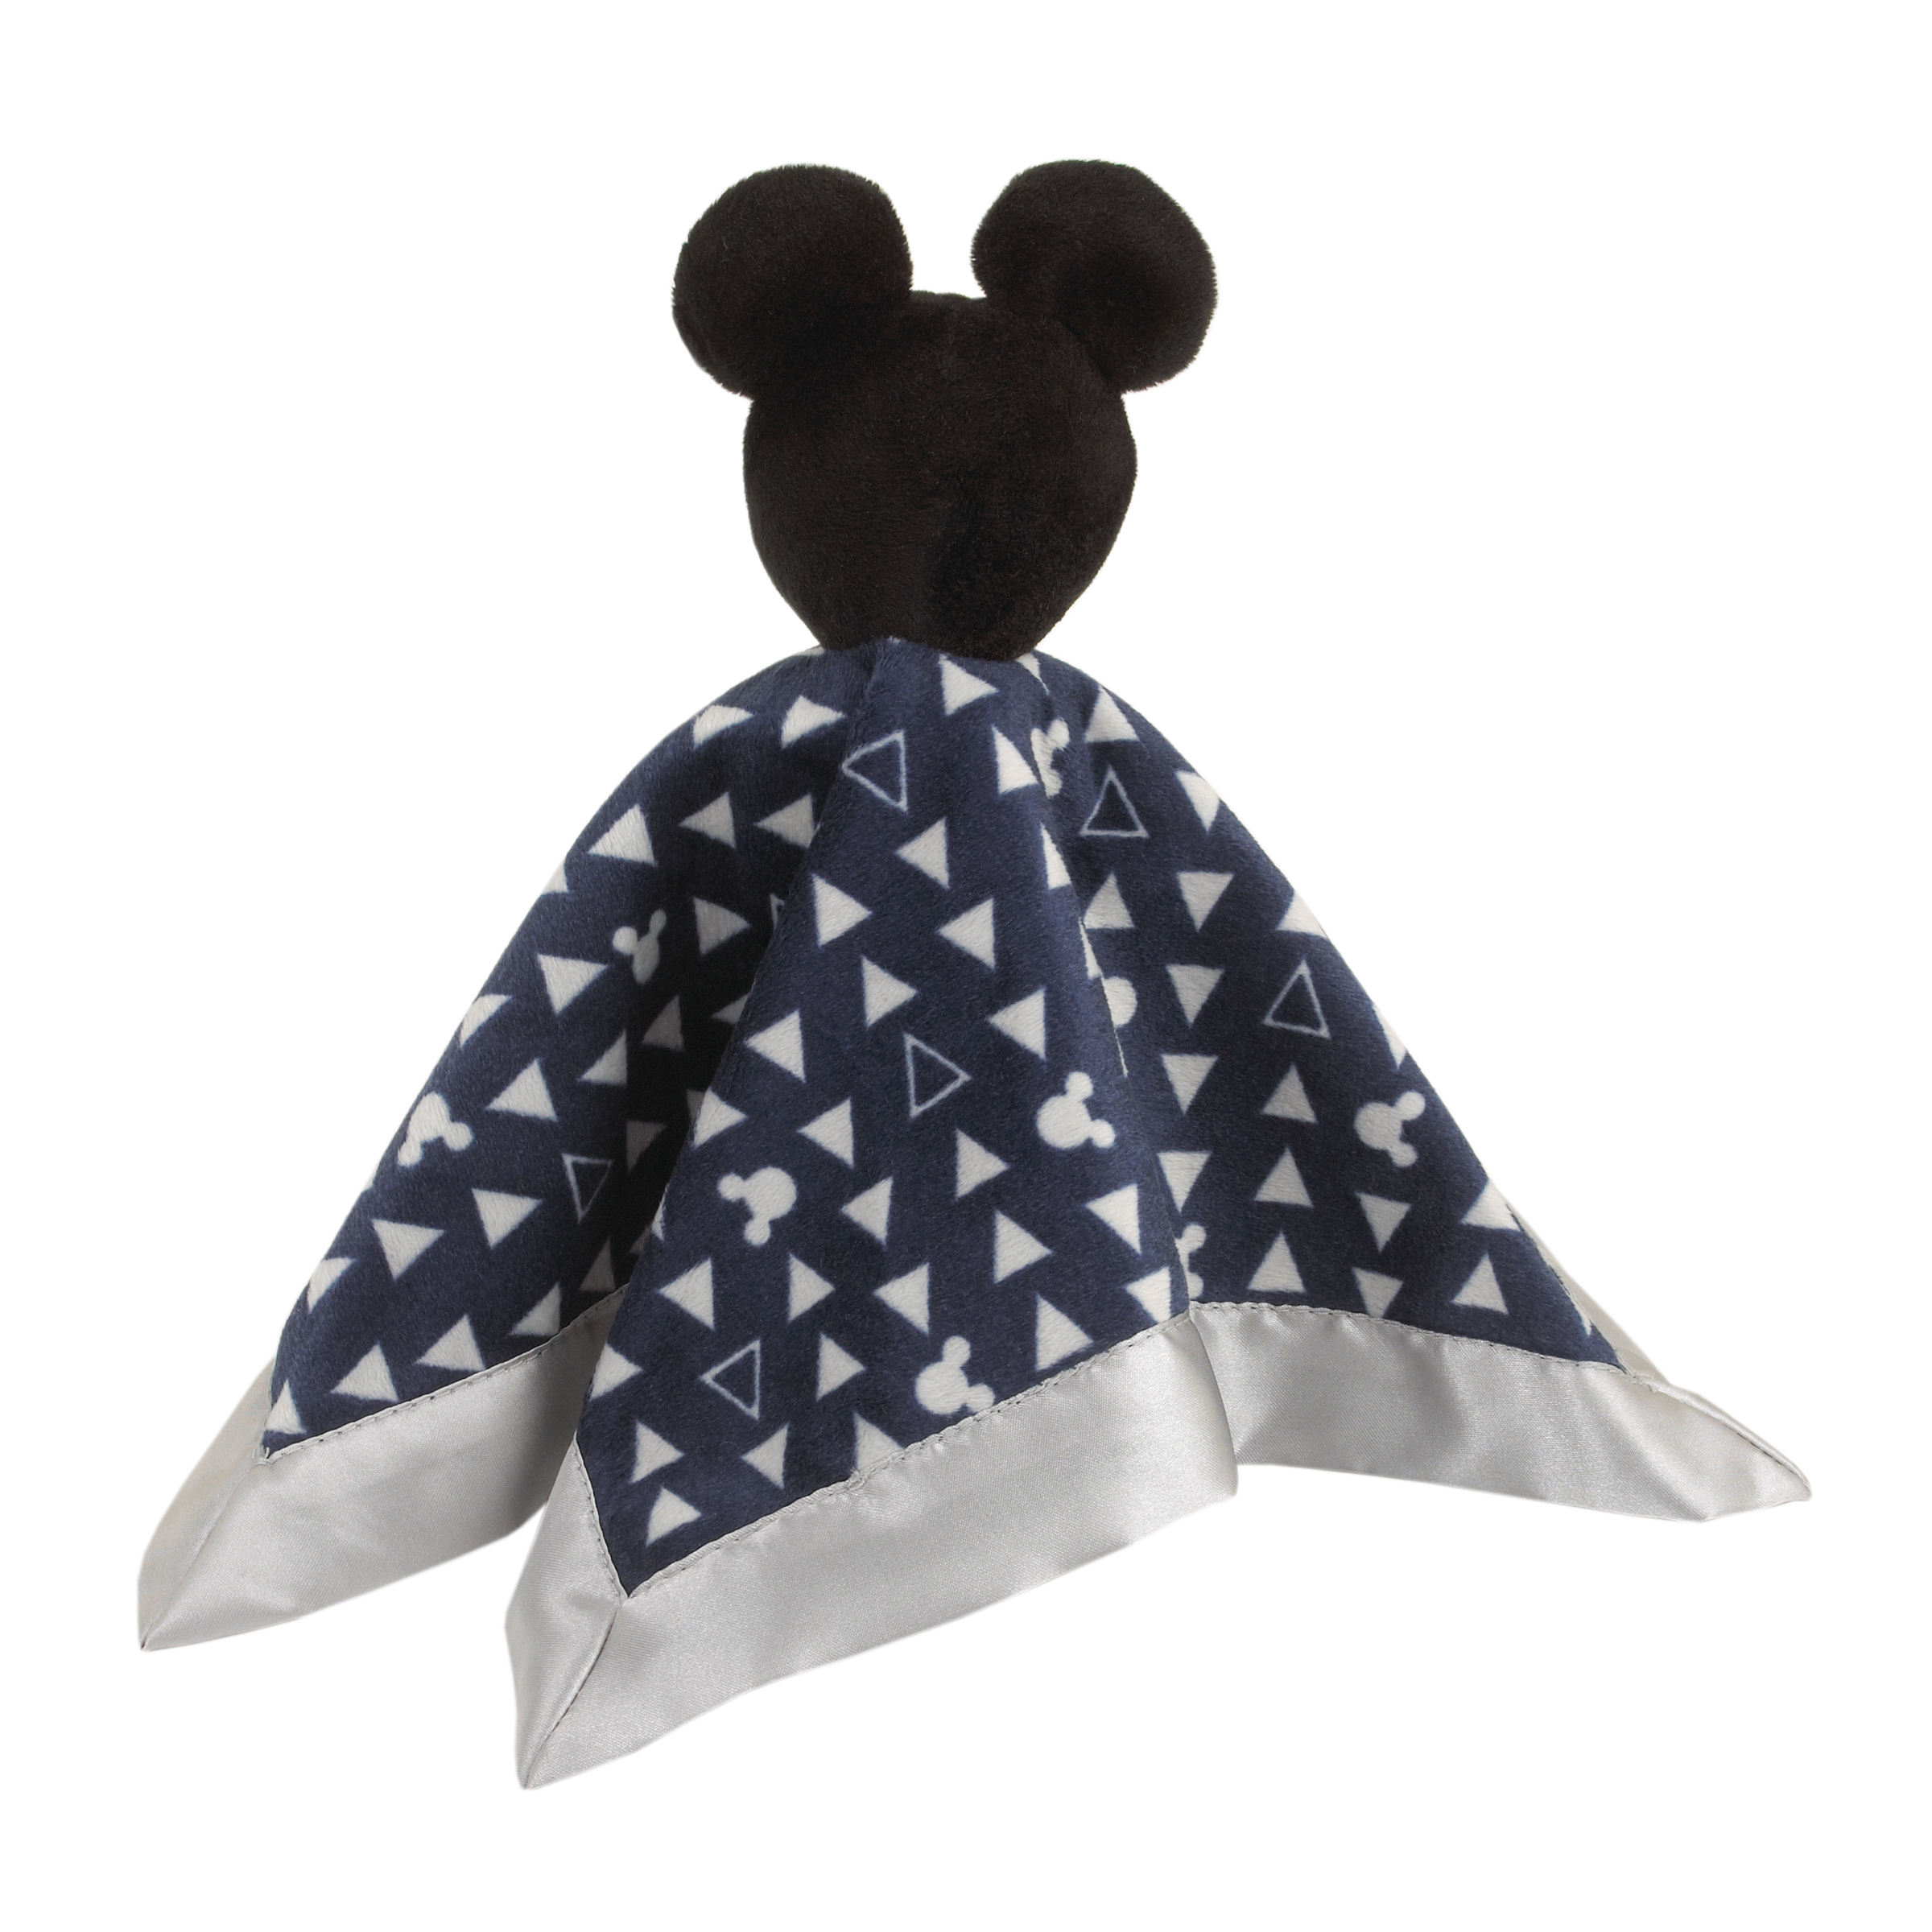 Disney Mickey Mouse Lovey Security Blanket, Navy/Grey - image 2 of 4